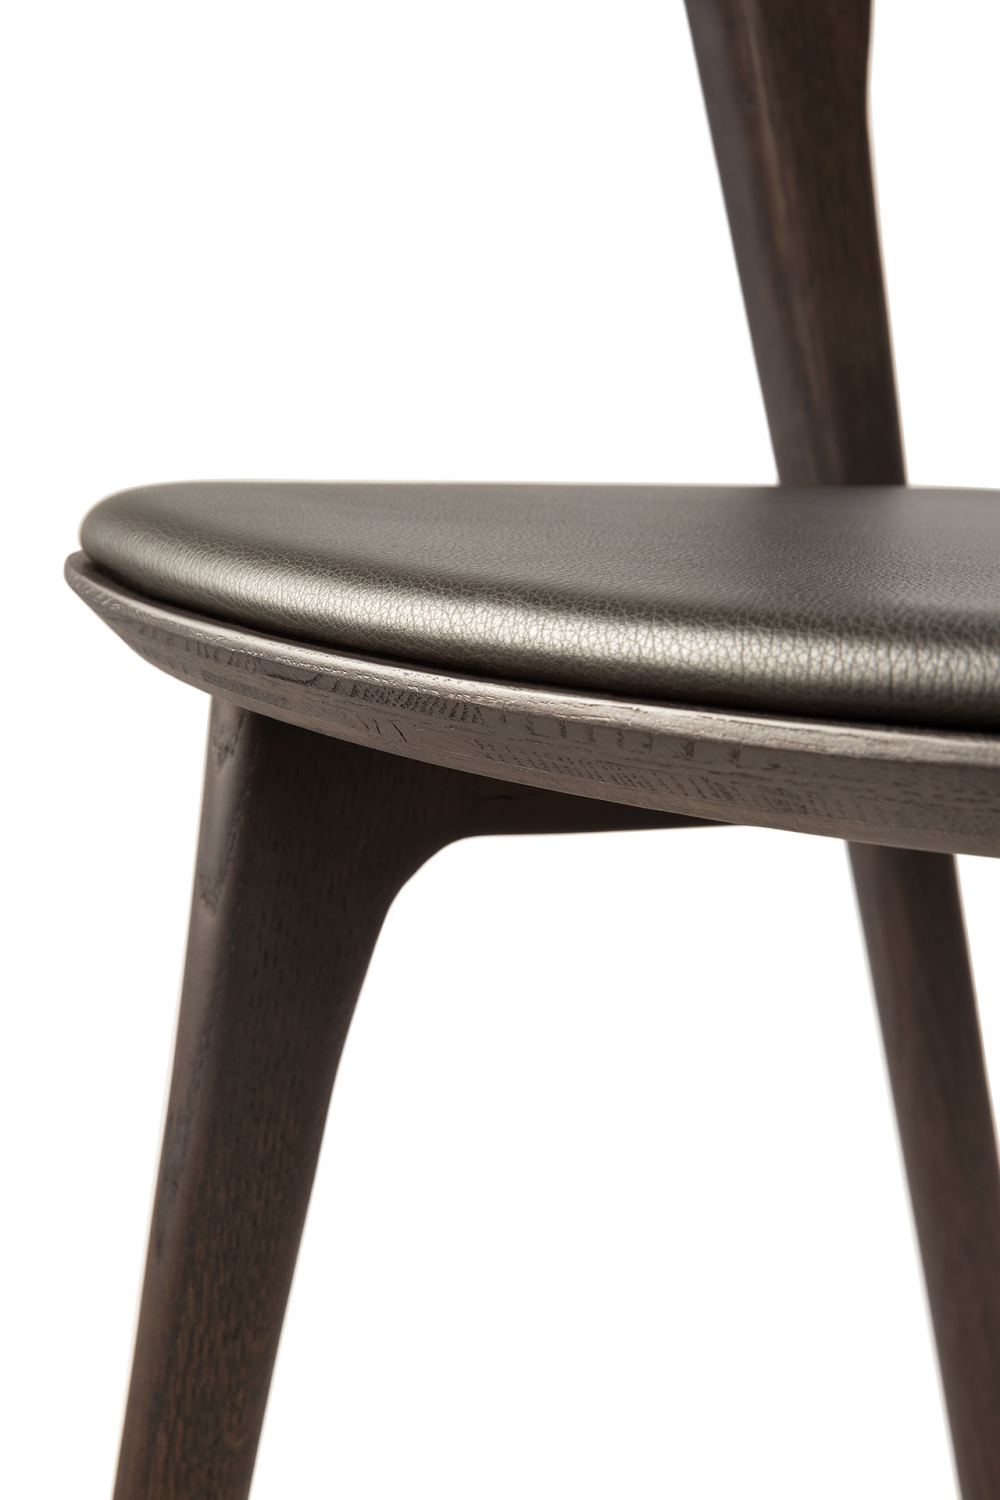 Varnished Oak Classic Dining Chair | Ethnicraft Bok | Oroa.com